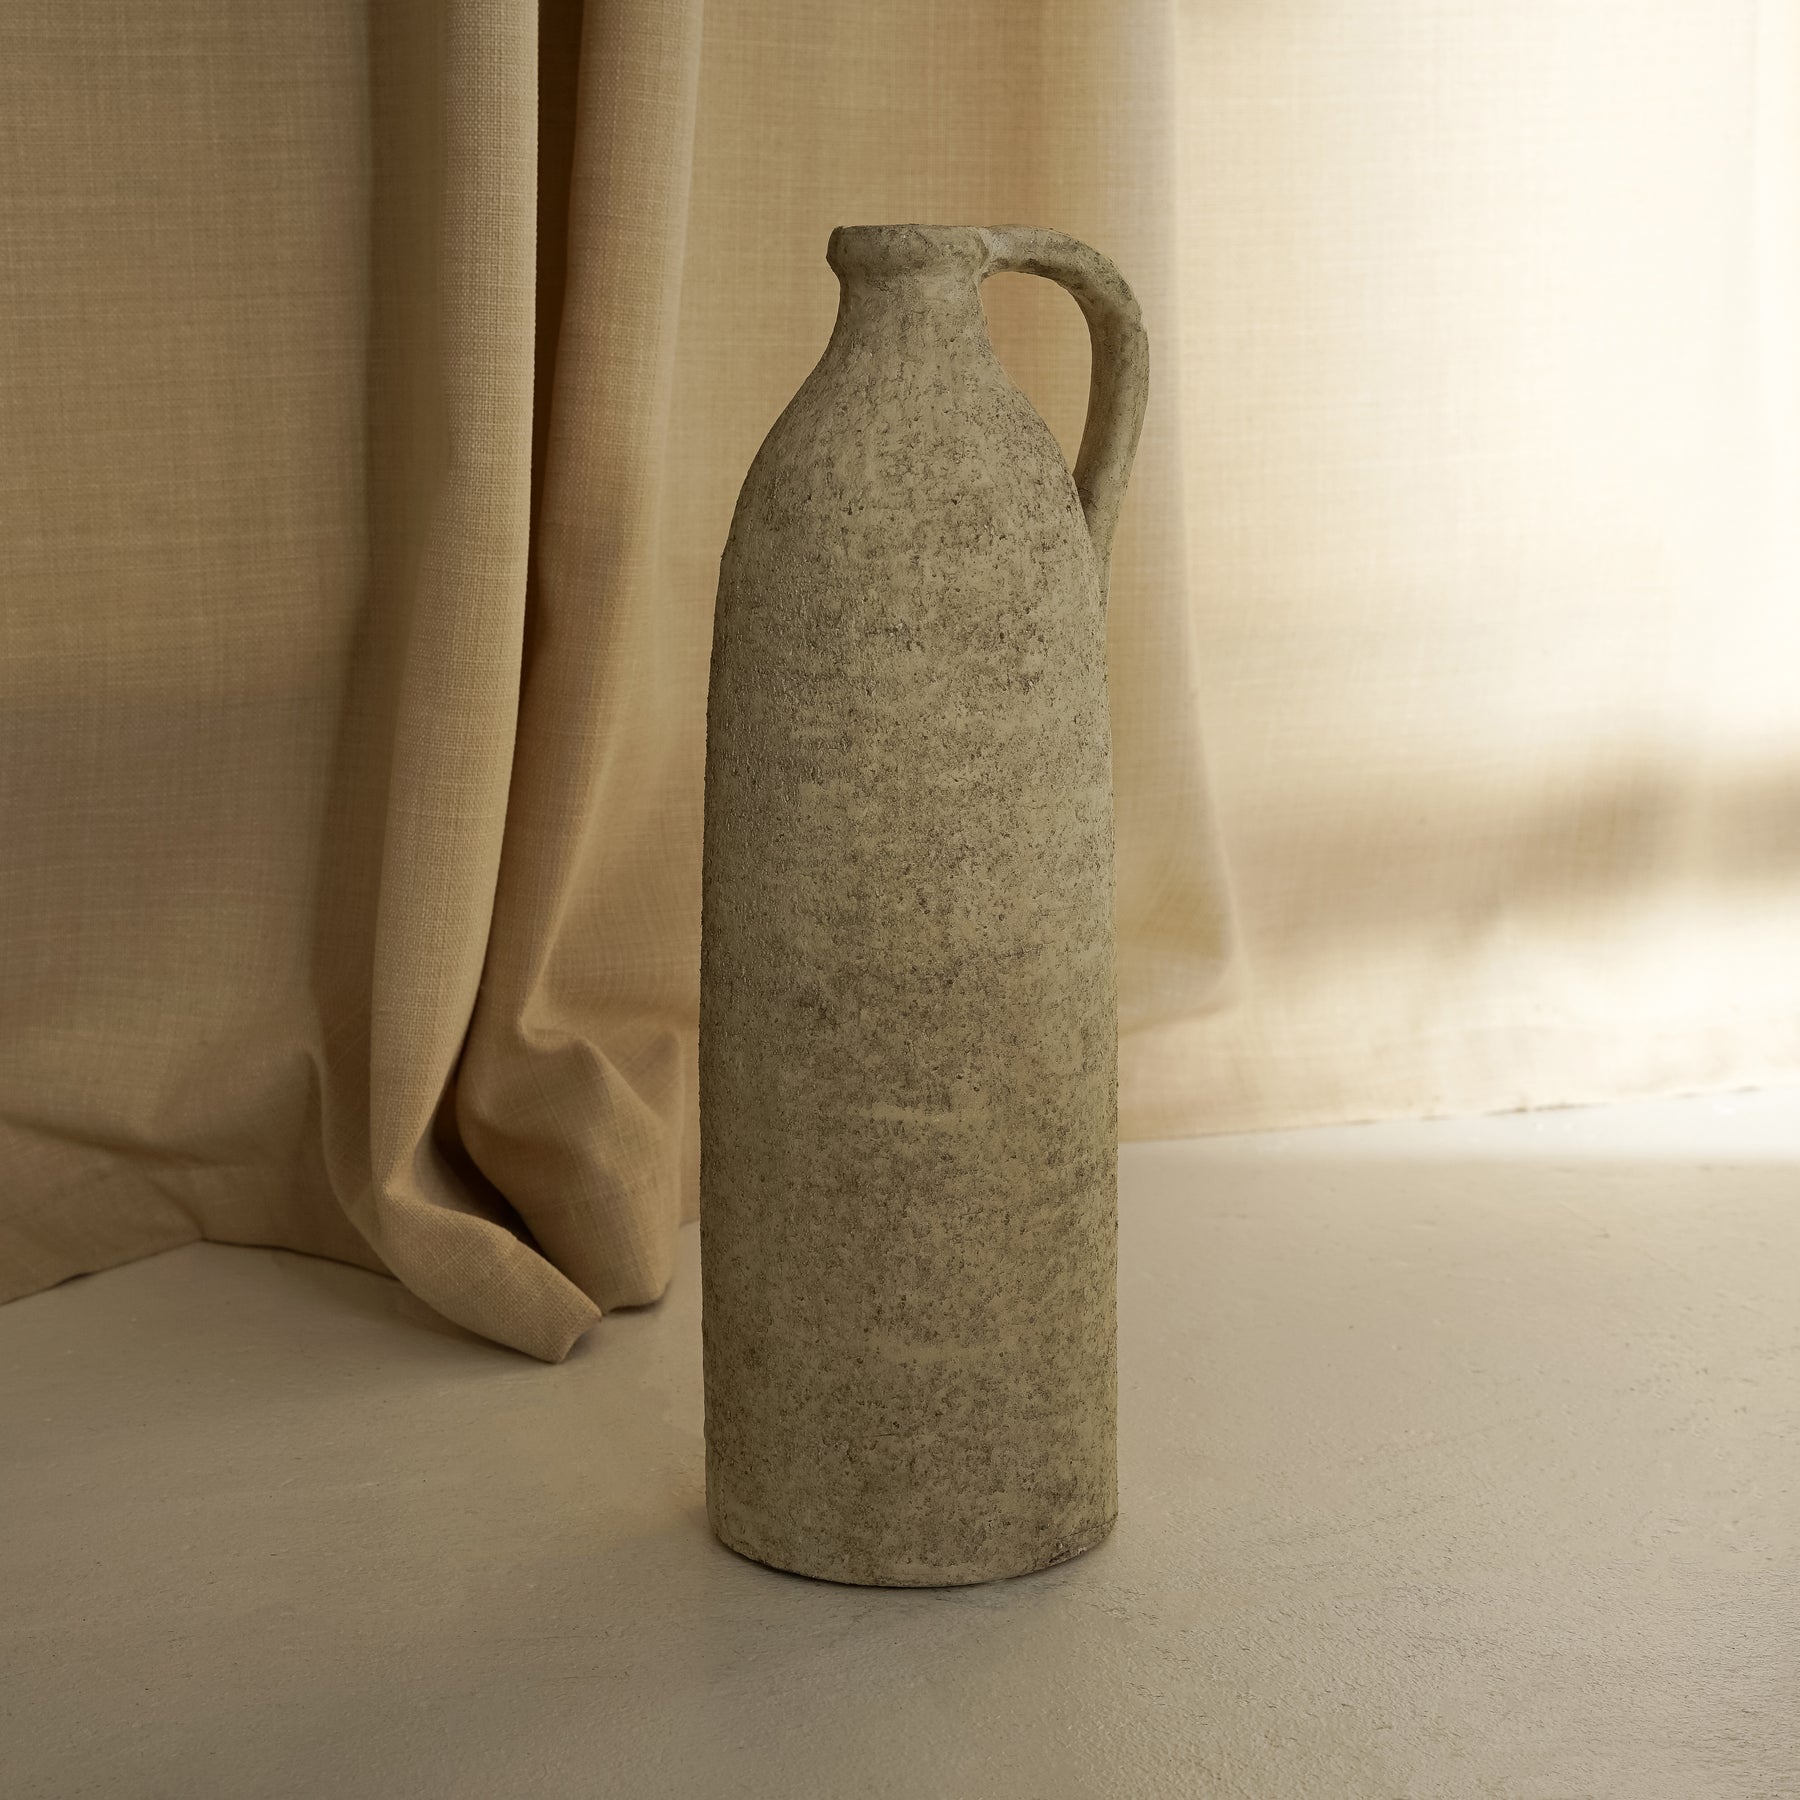 Beige Textured Terracotta Small Vase in front of fabric